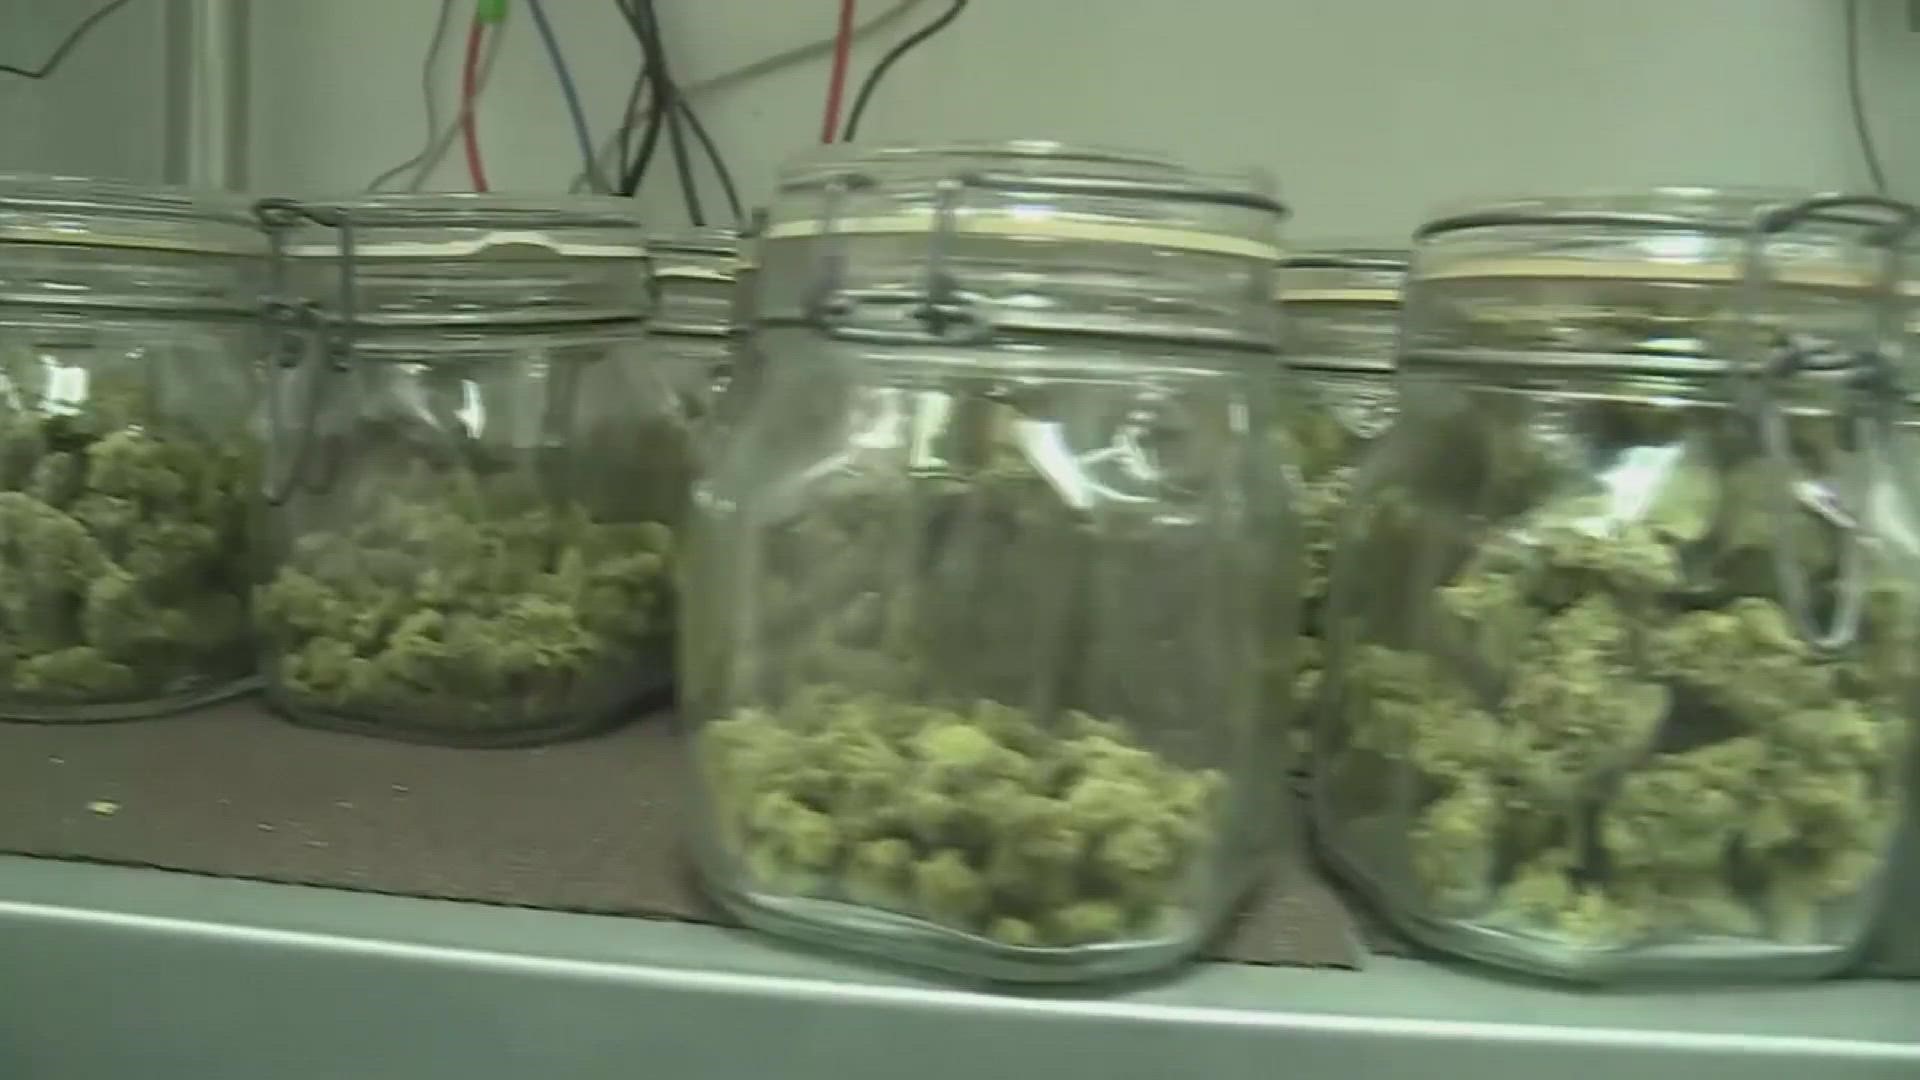 Voters in Oklahoma have decided not to legalize the possession and growth of recreational marijuana in the state.